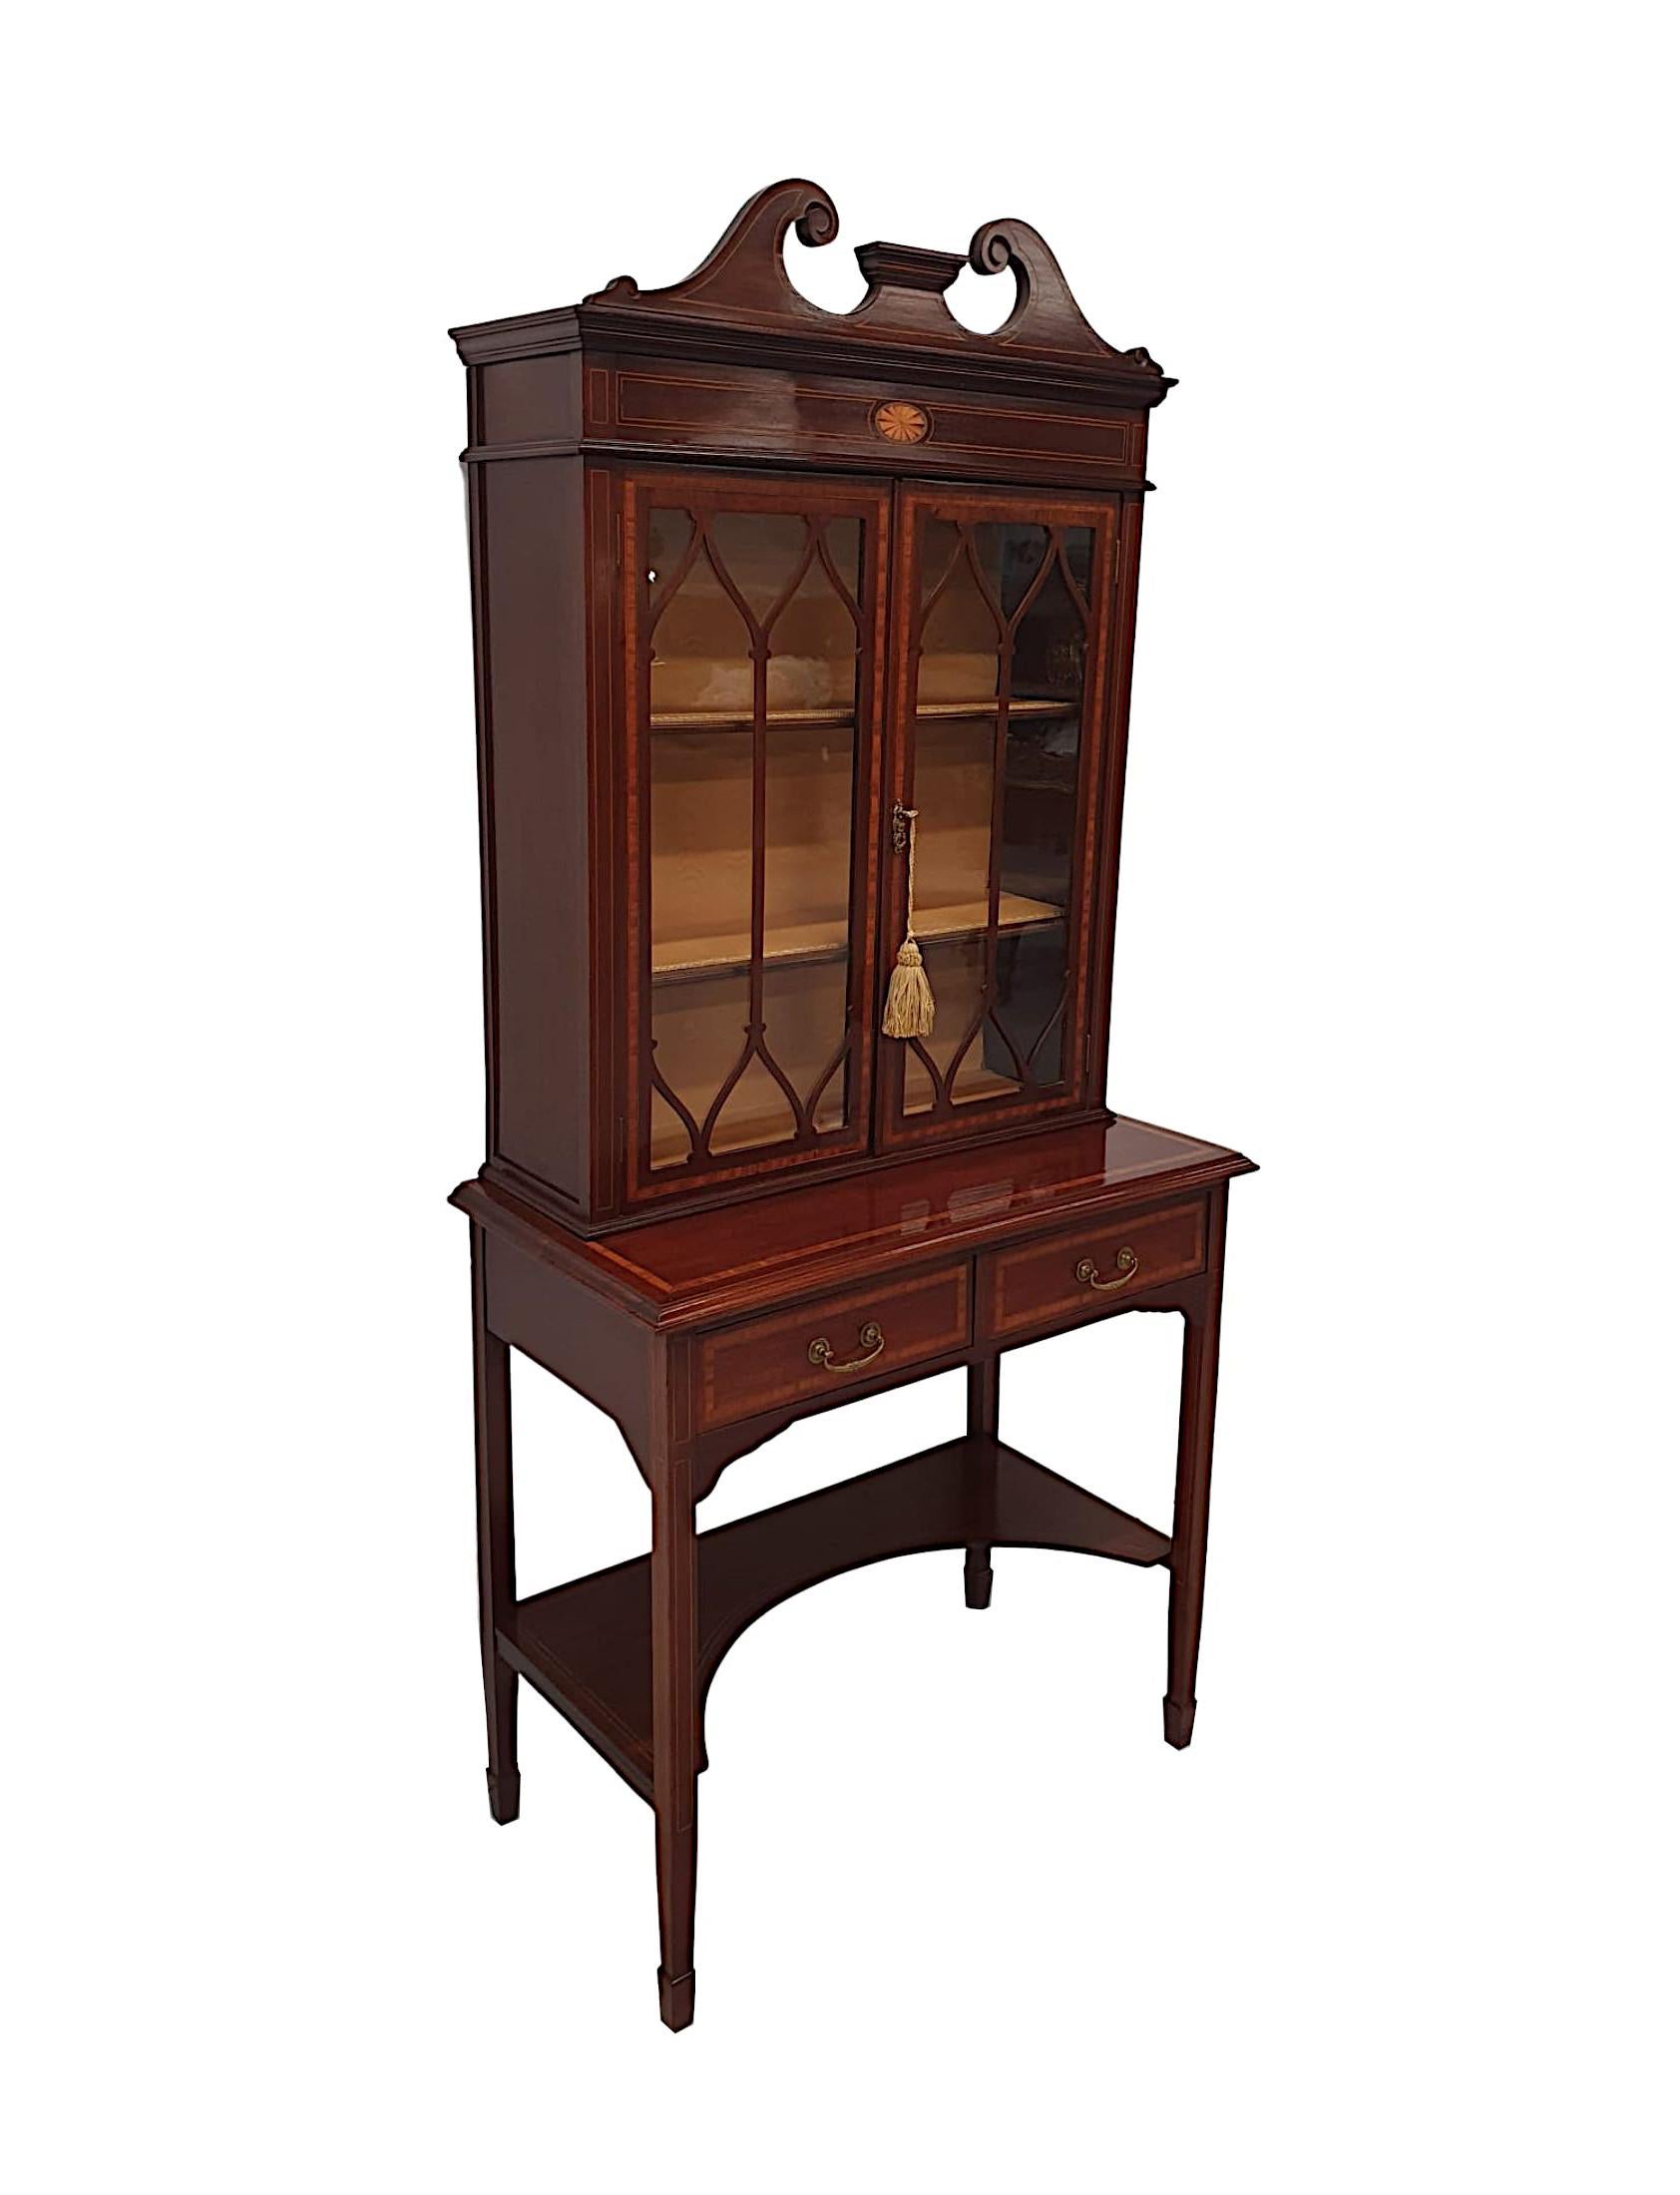 A fabulous quality Edwardian mahogany two door display case or bookcase, with gorgeous patination, marquetry detail and fine line inlay throughout. The broken swan neck pediment raised over moulded cornice with a lovely centred marquetry round fan